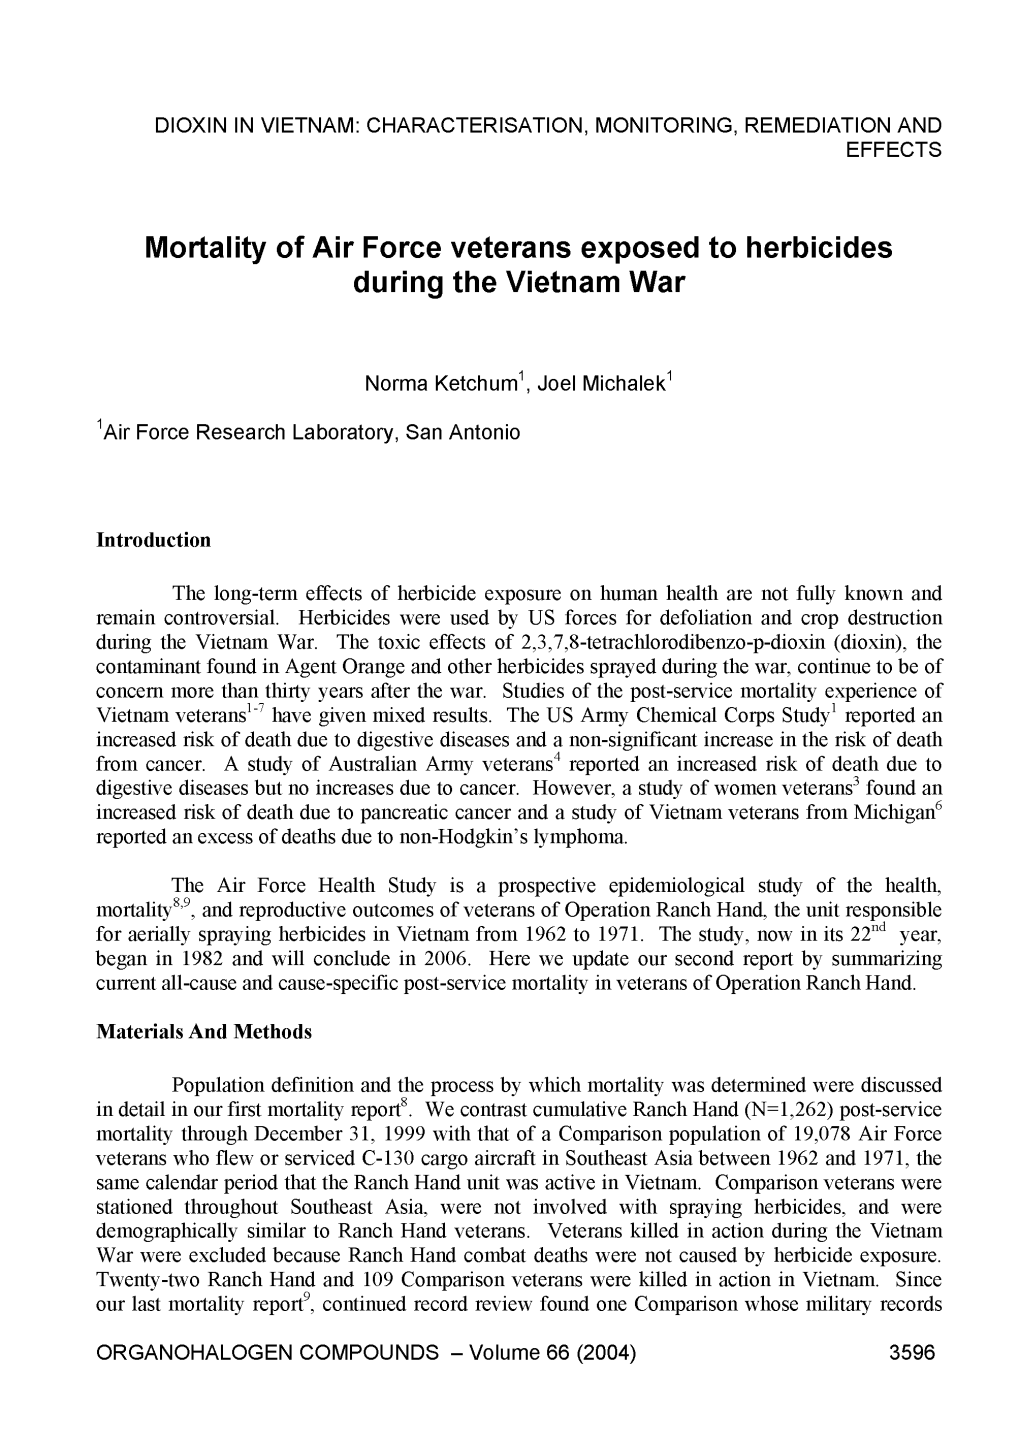 Mortality of Air Force Veterans Exposed to Herbicides During the Vietnam War